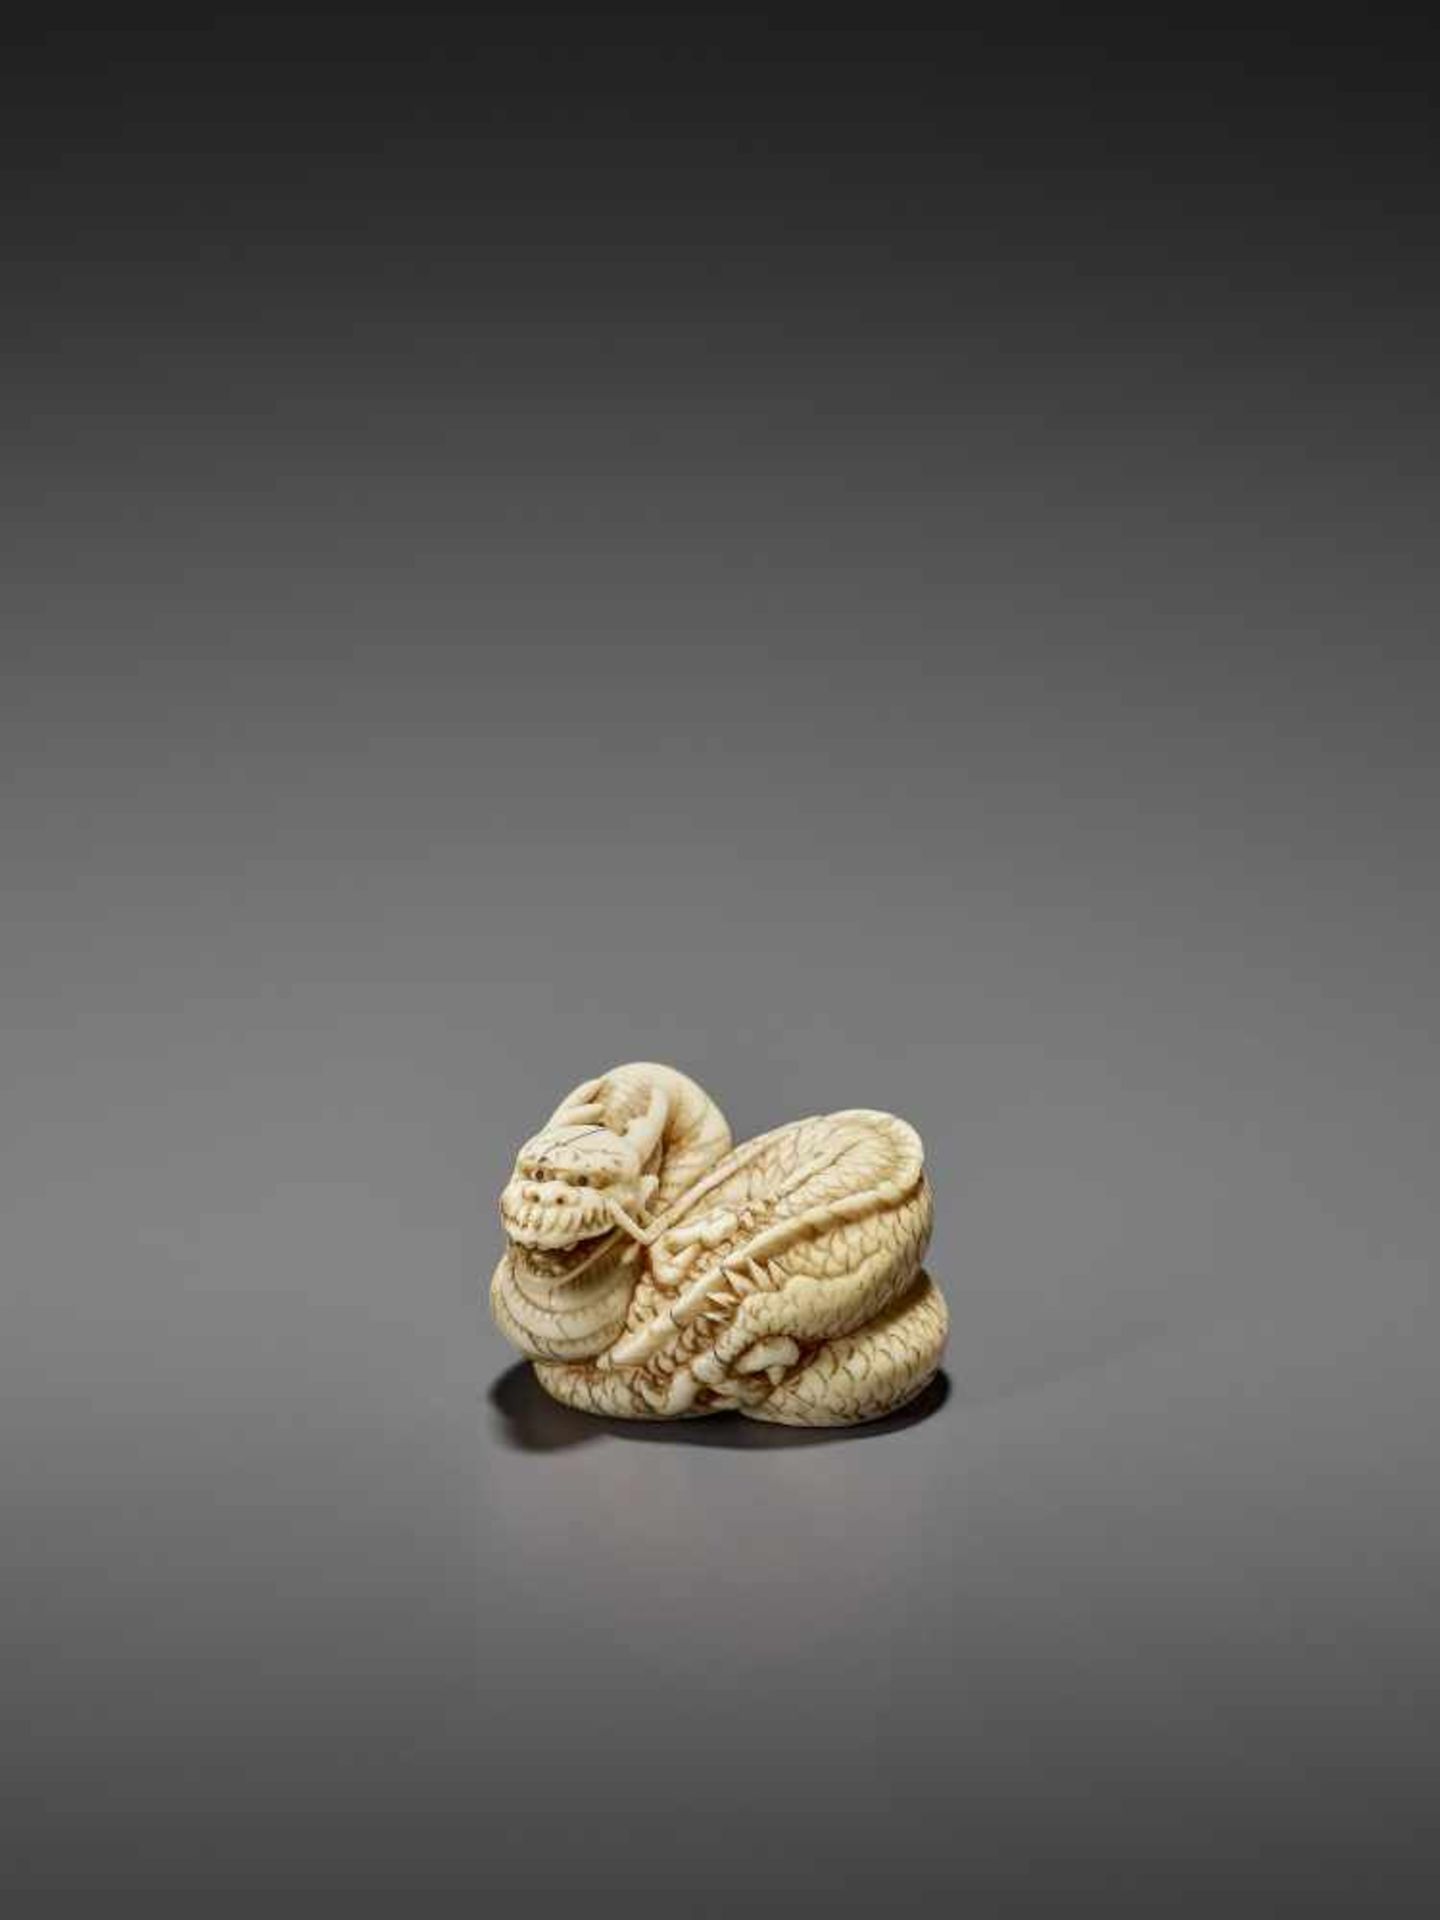 A GOOD IVORY NETSUKE OF A COILED DRAGON UnsignedJapan, Kyoto, late 18th to early 19th century, Edo - Image 3 of 10